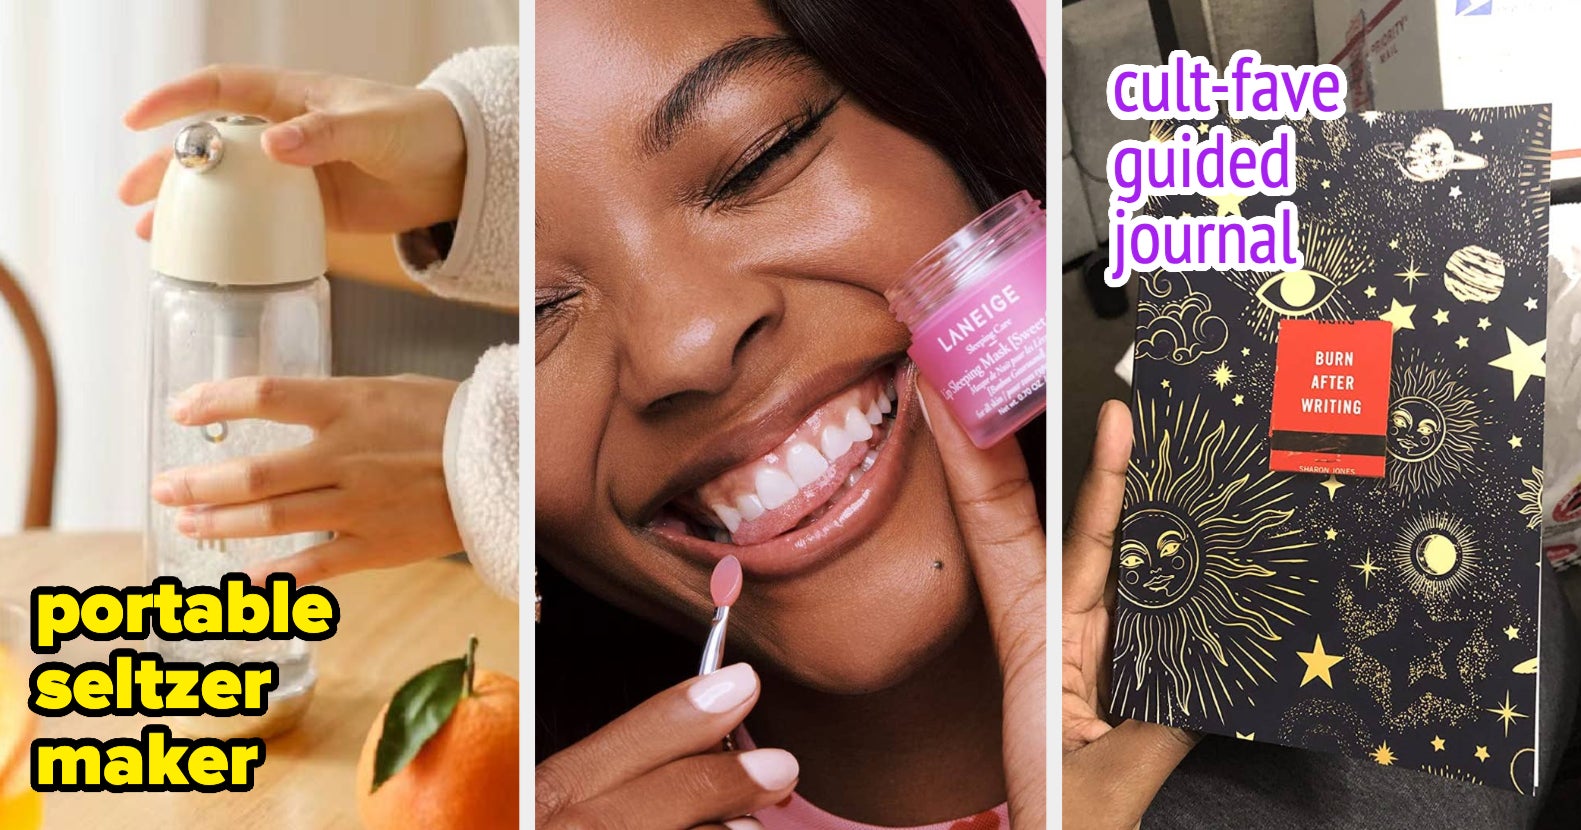 39 TikTok Products That Are Really Pretty, Really Practical, And